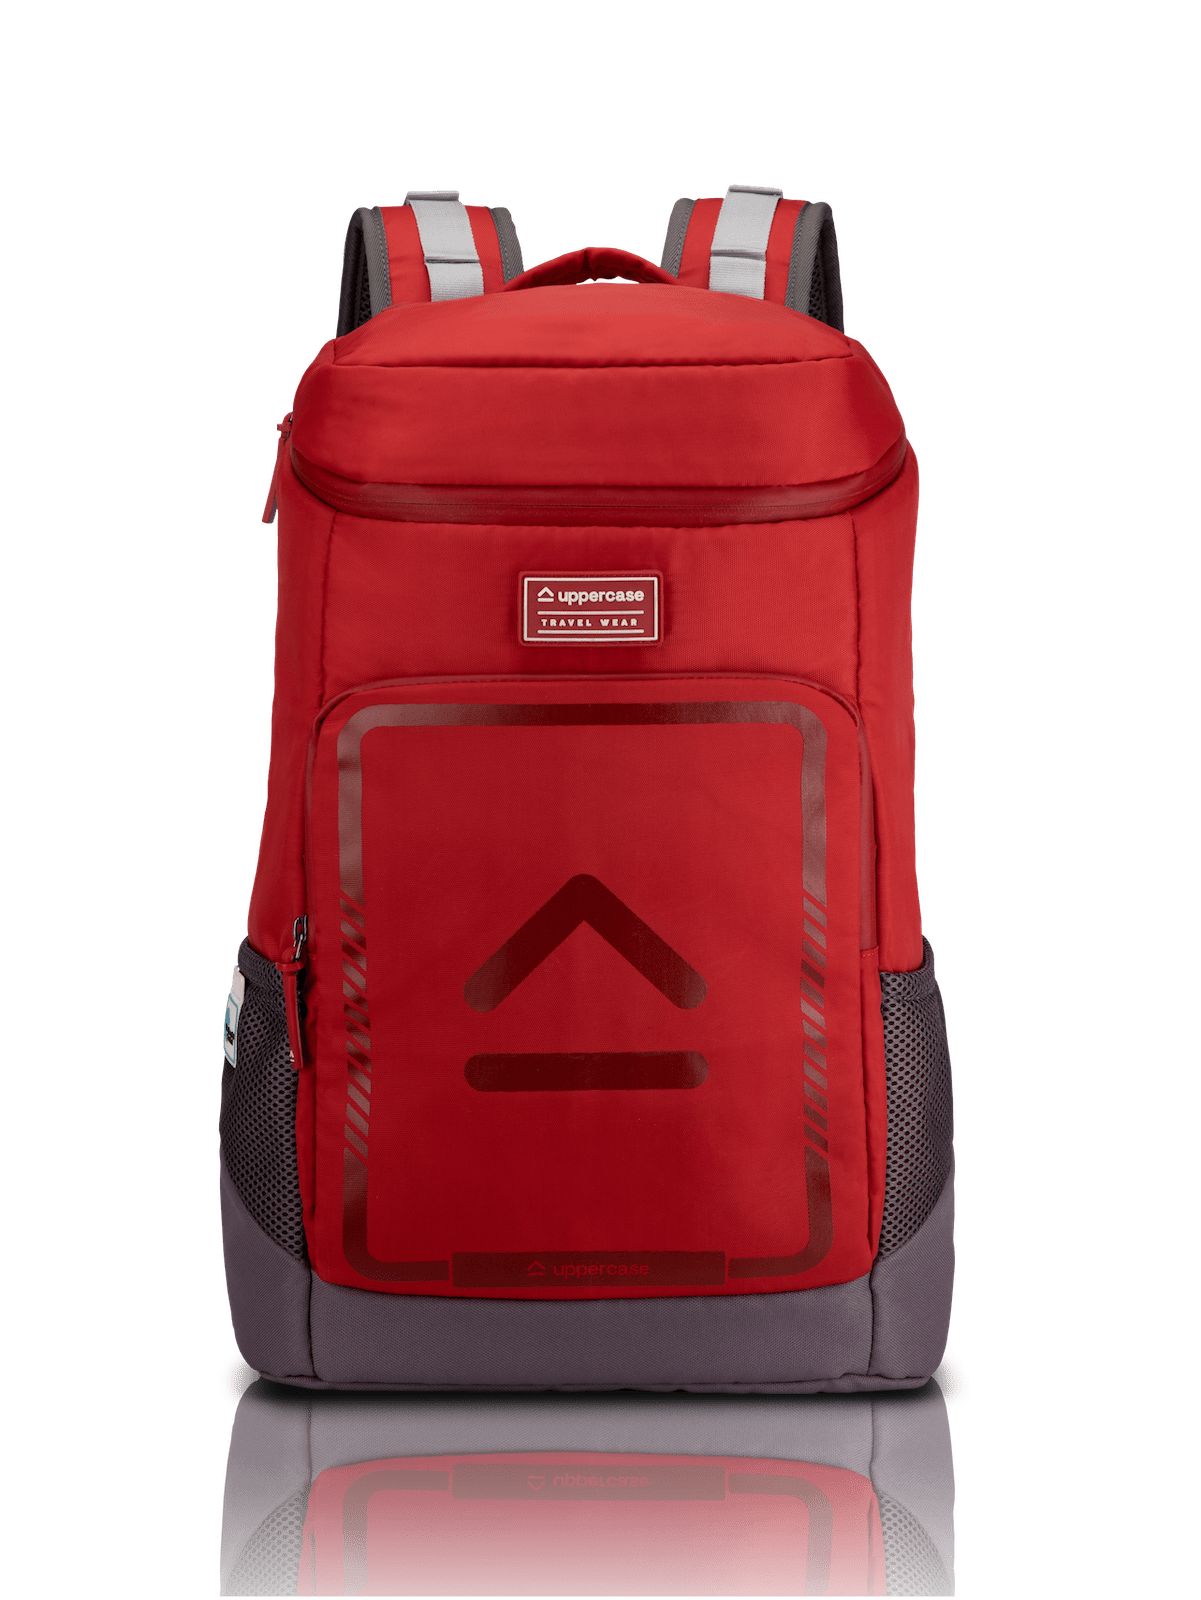 uppercase Tall Boy 14" Laptop Backpack WaterRepellent College Travel Bag 23L Red